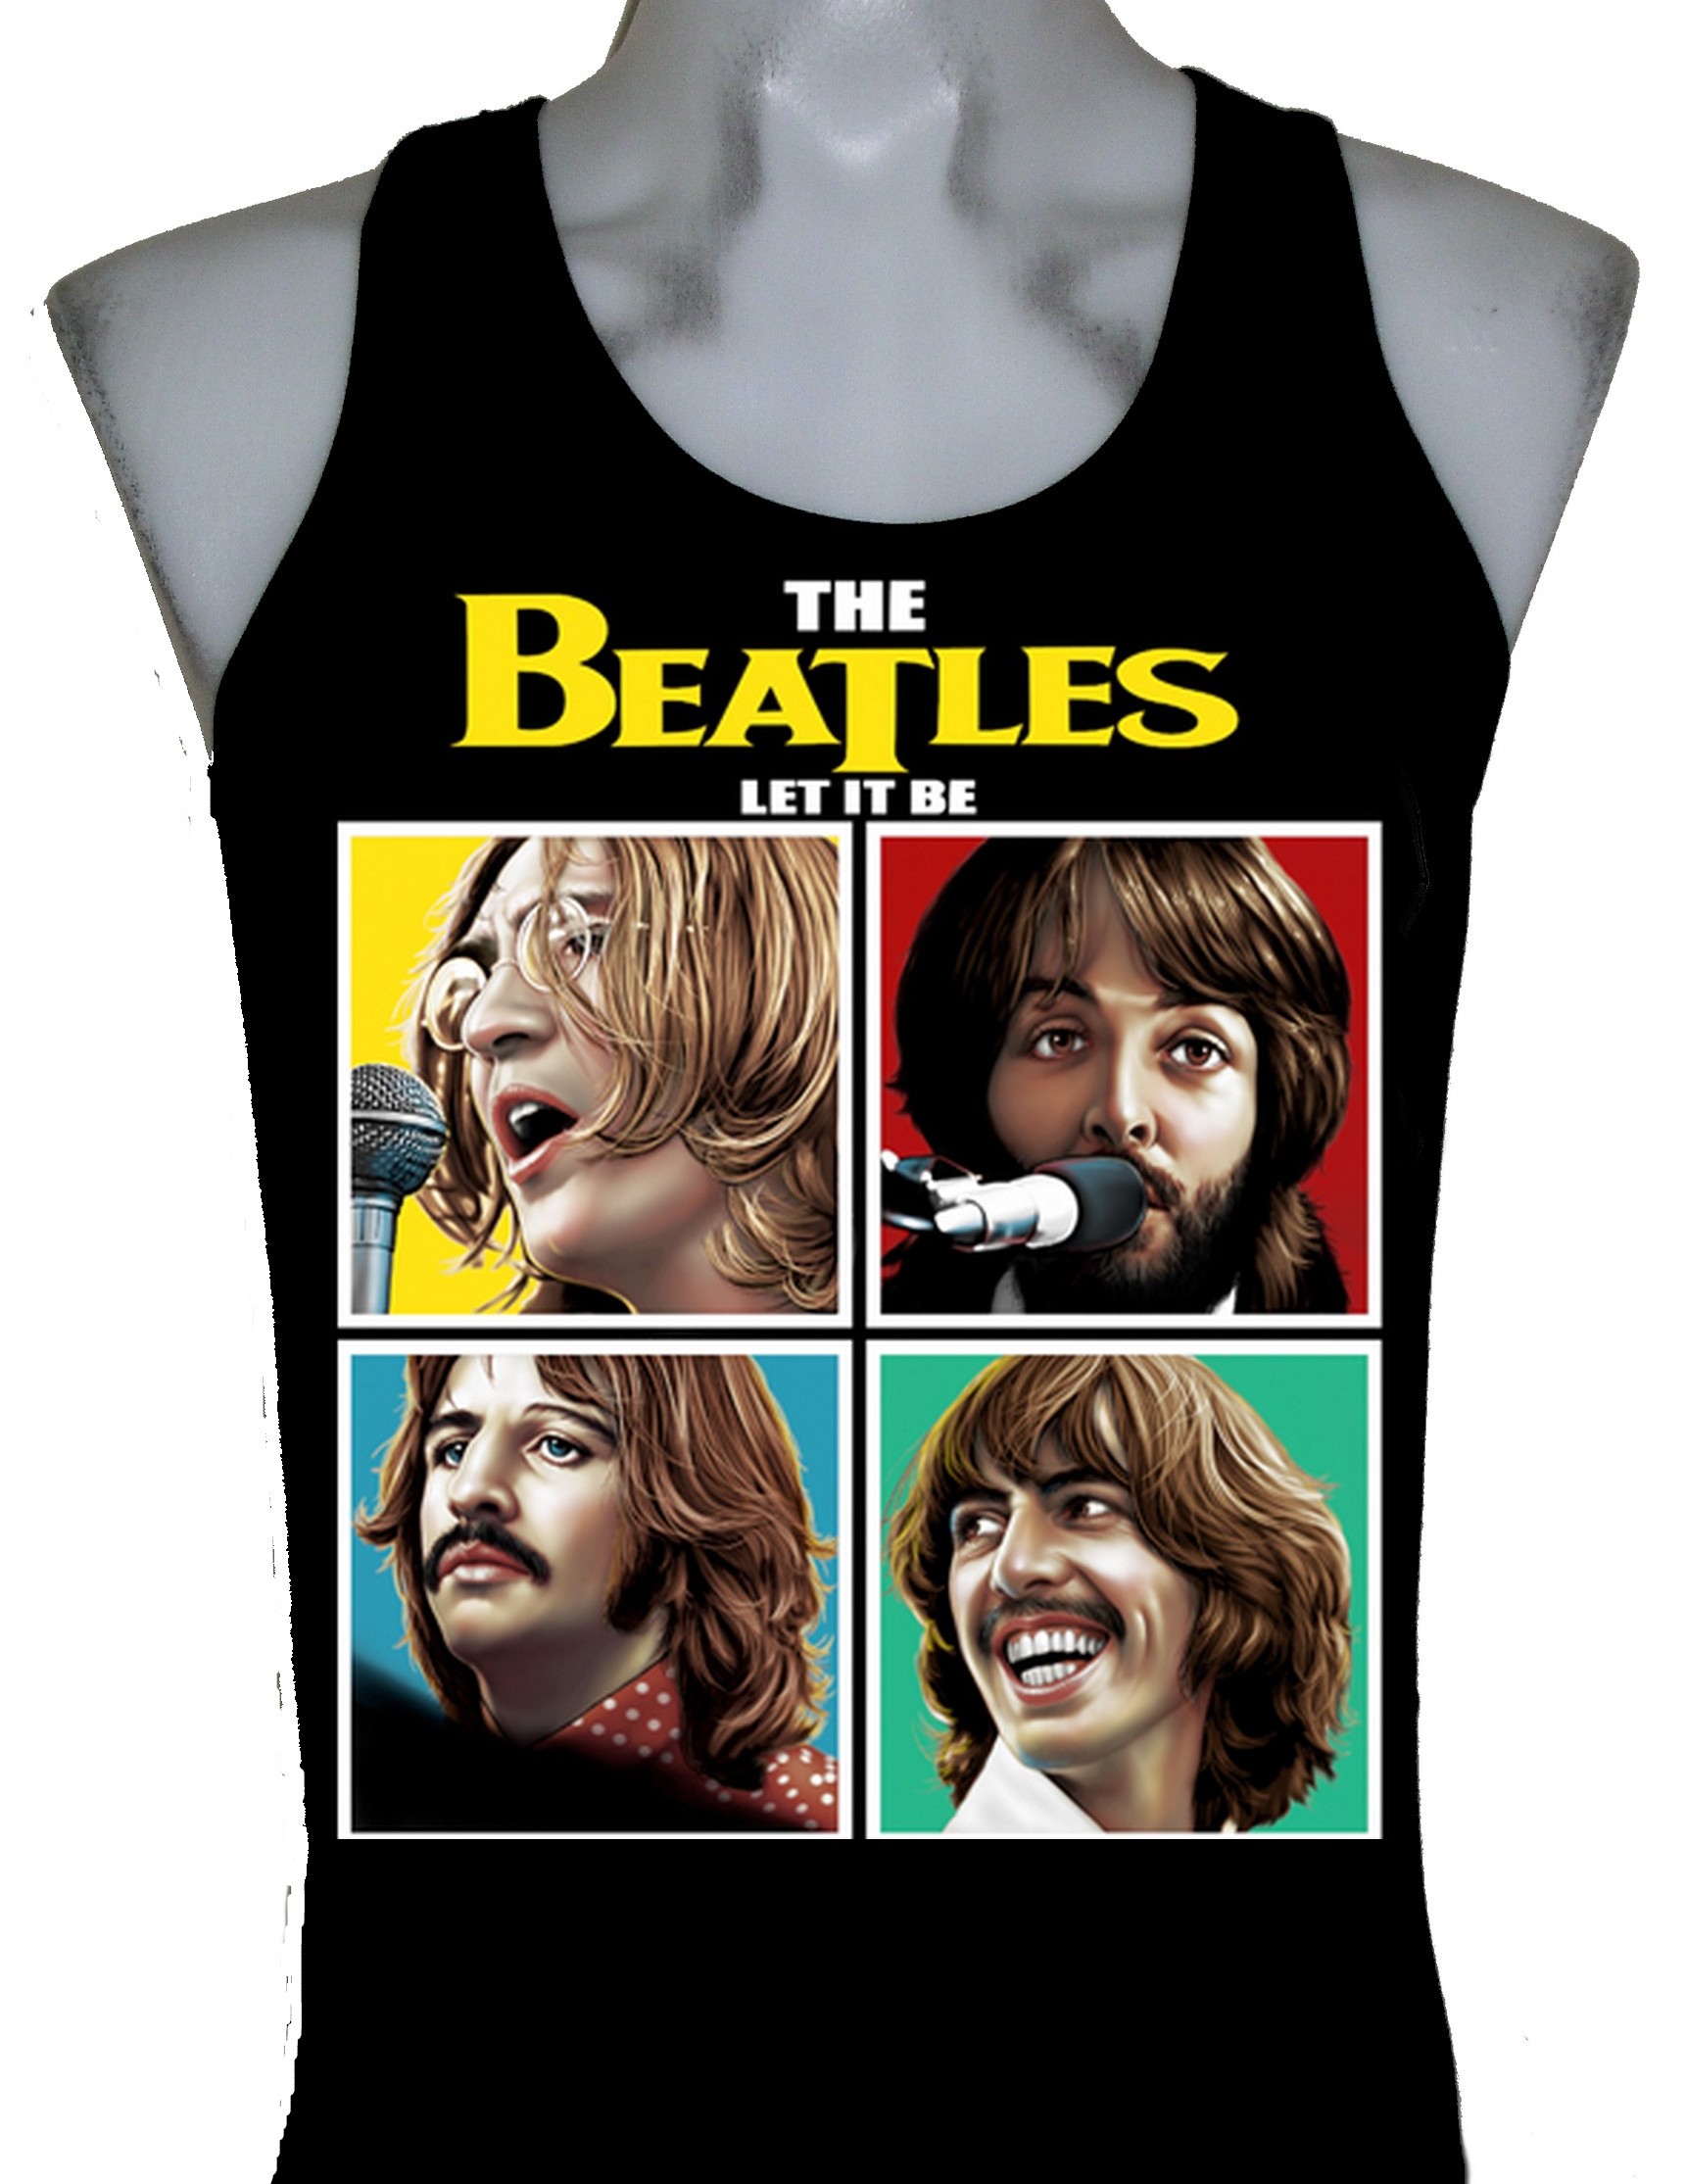 New: THE BEATLES Sleeveless Black Concert T-Shirt Muscle Tank Top Let It Be 